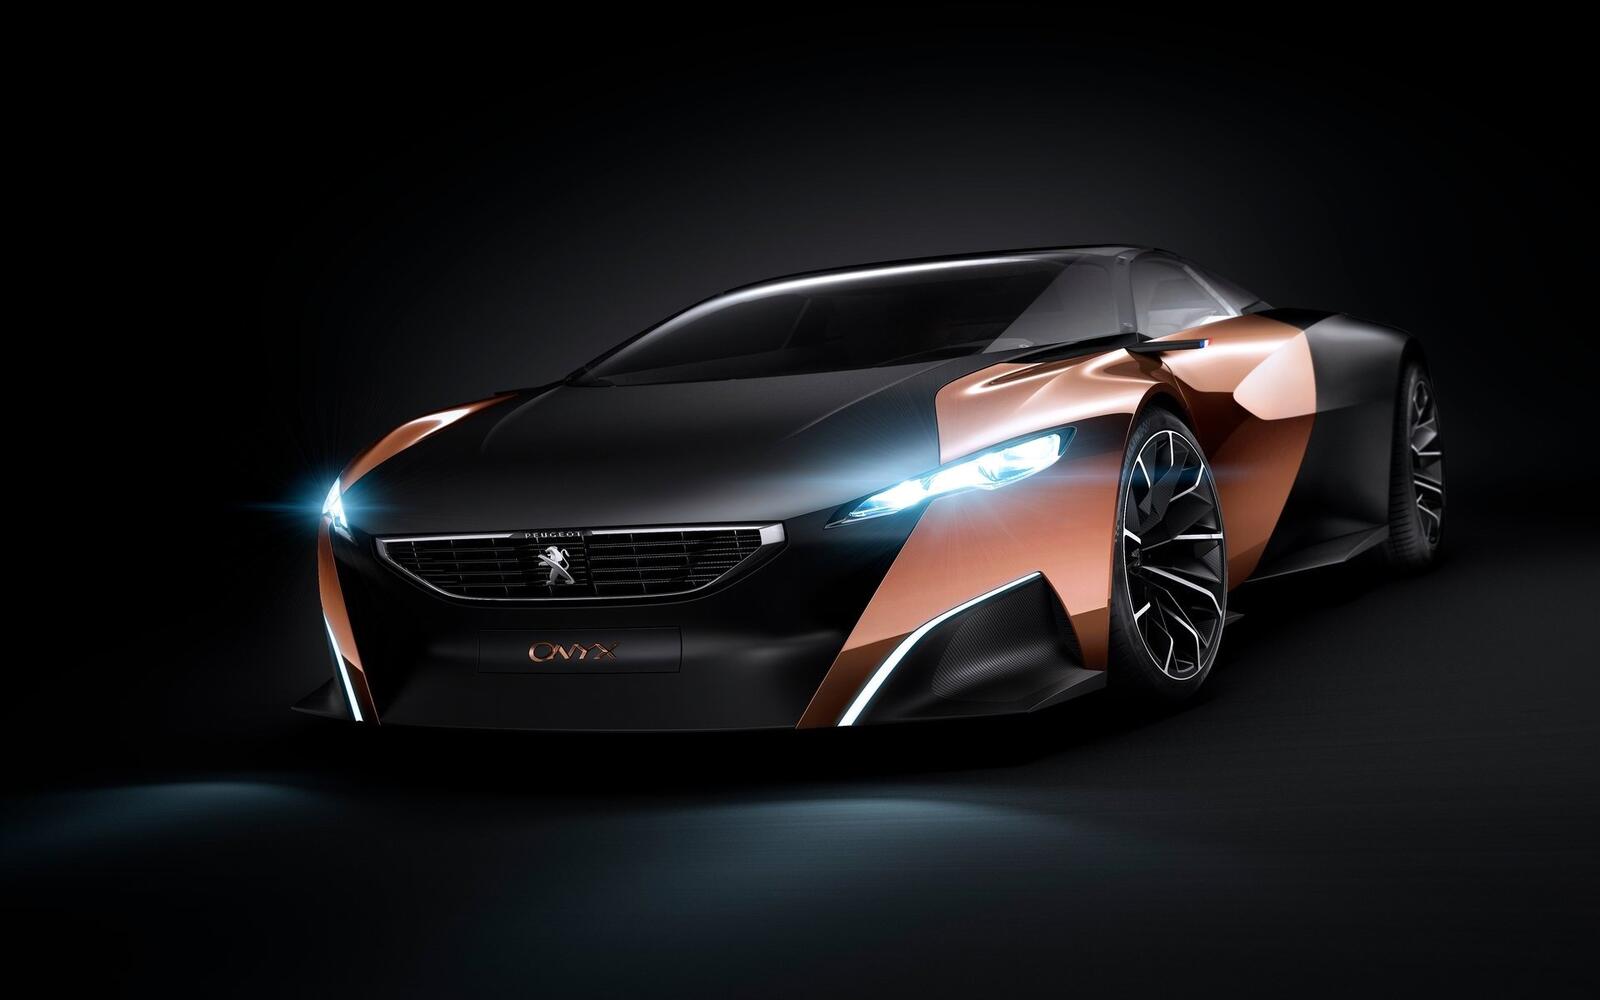 Wallpapers Peugeot Onyx front view supercar on the desktop